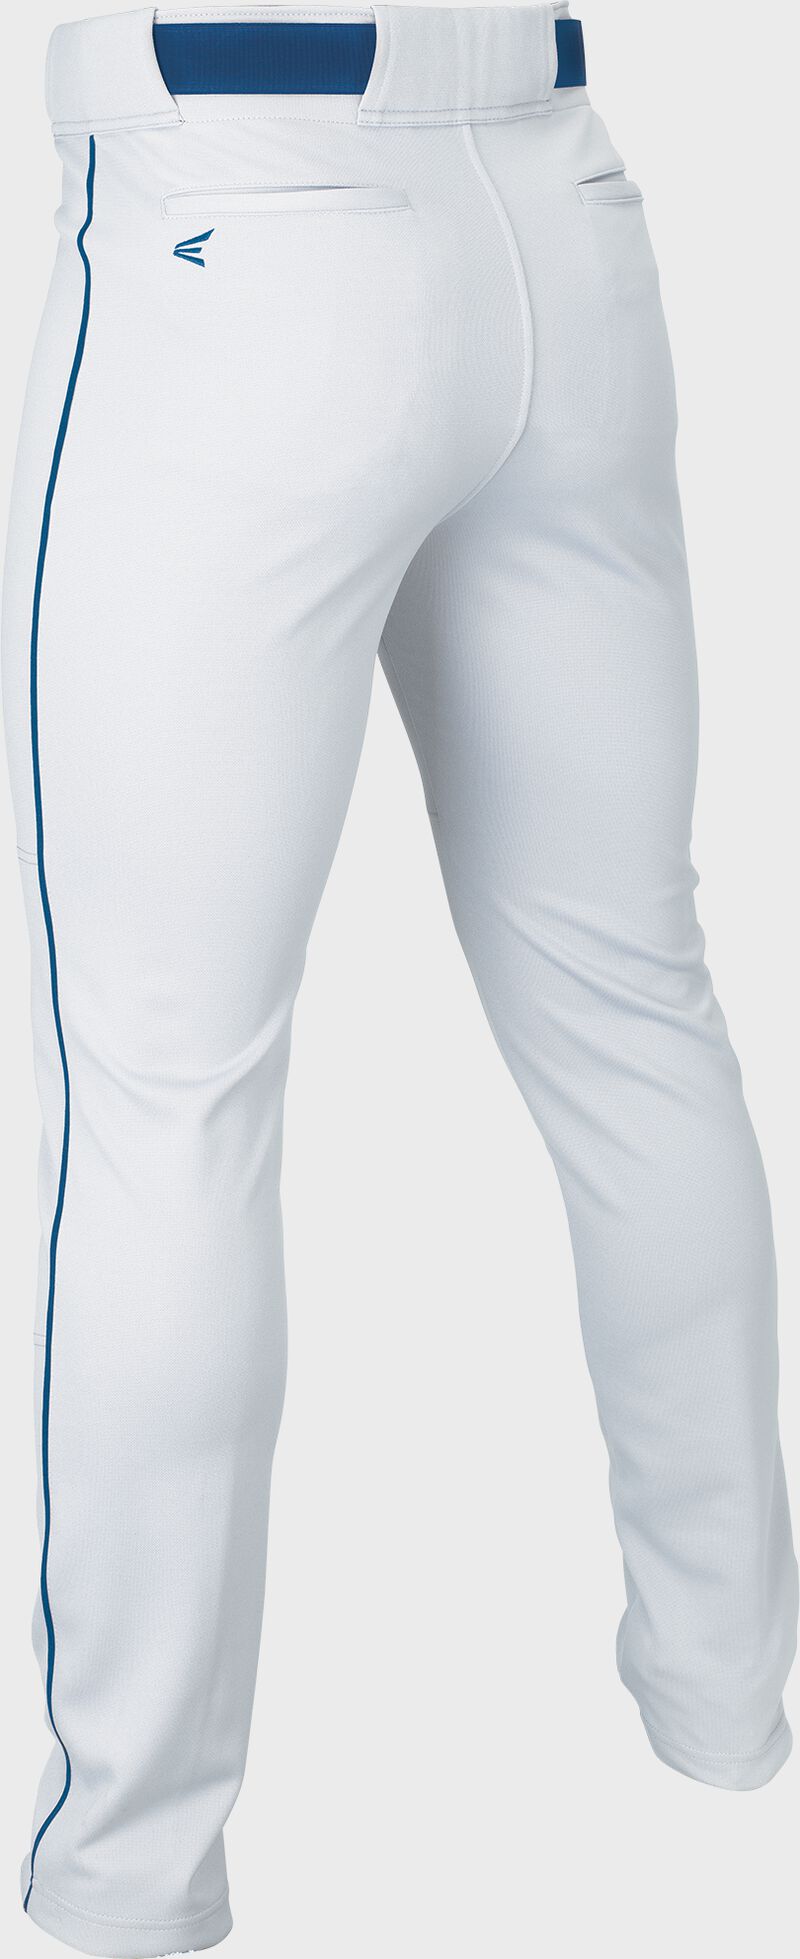 RIVAL+ PANT ADULT PIPED WHITE/NAVY L